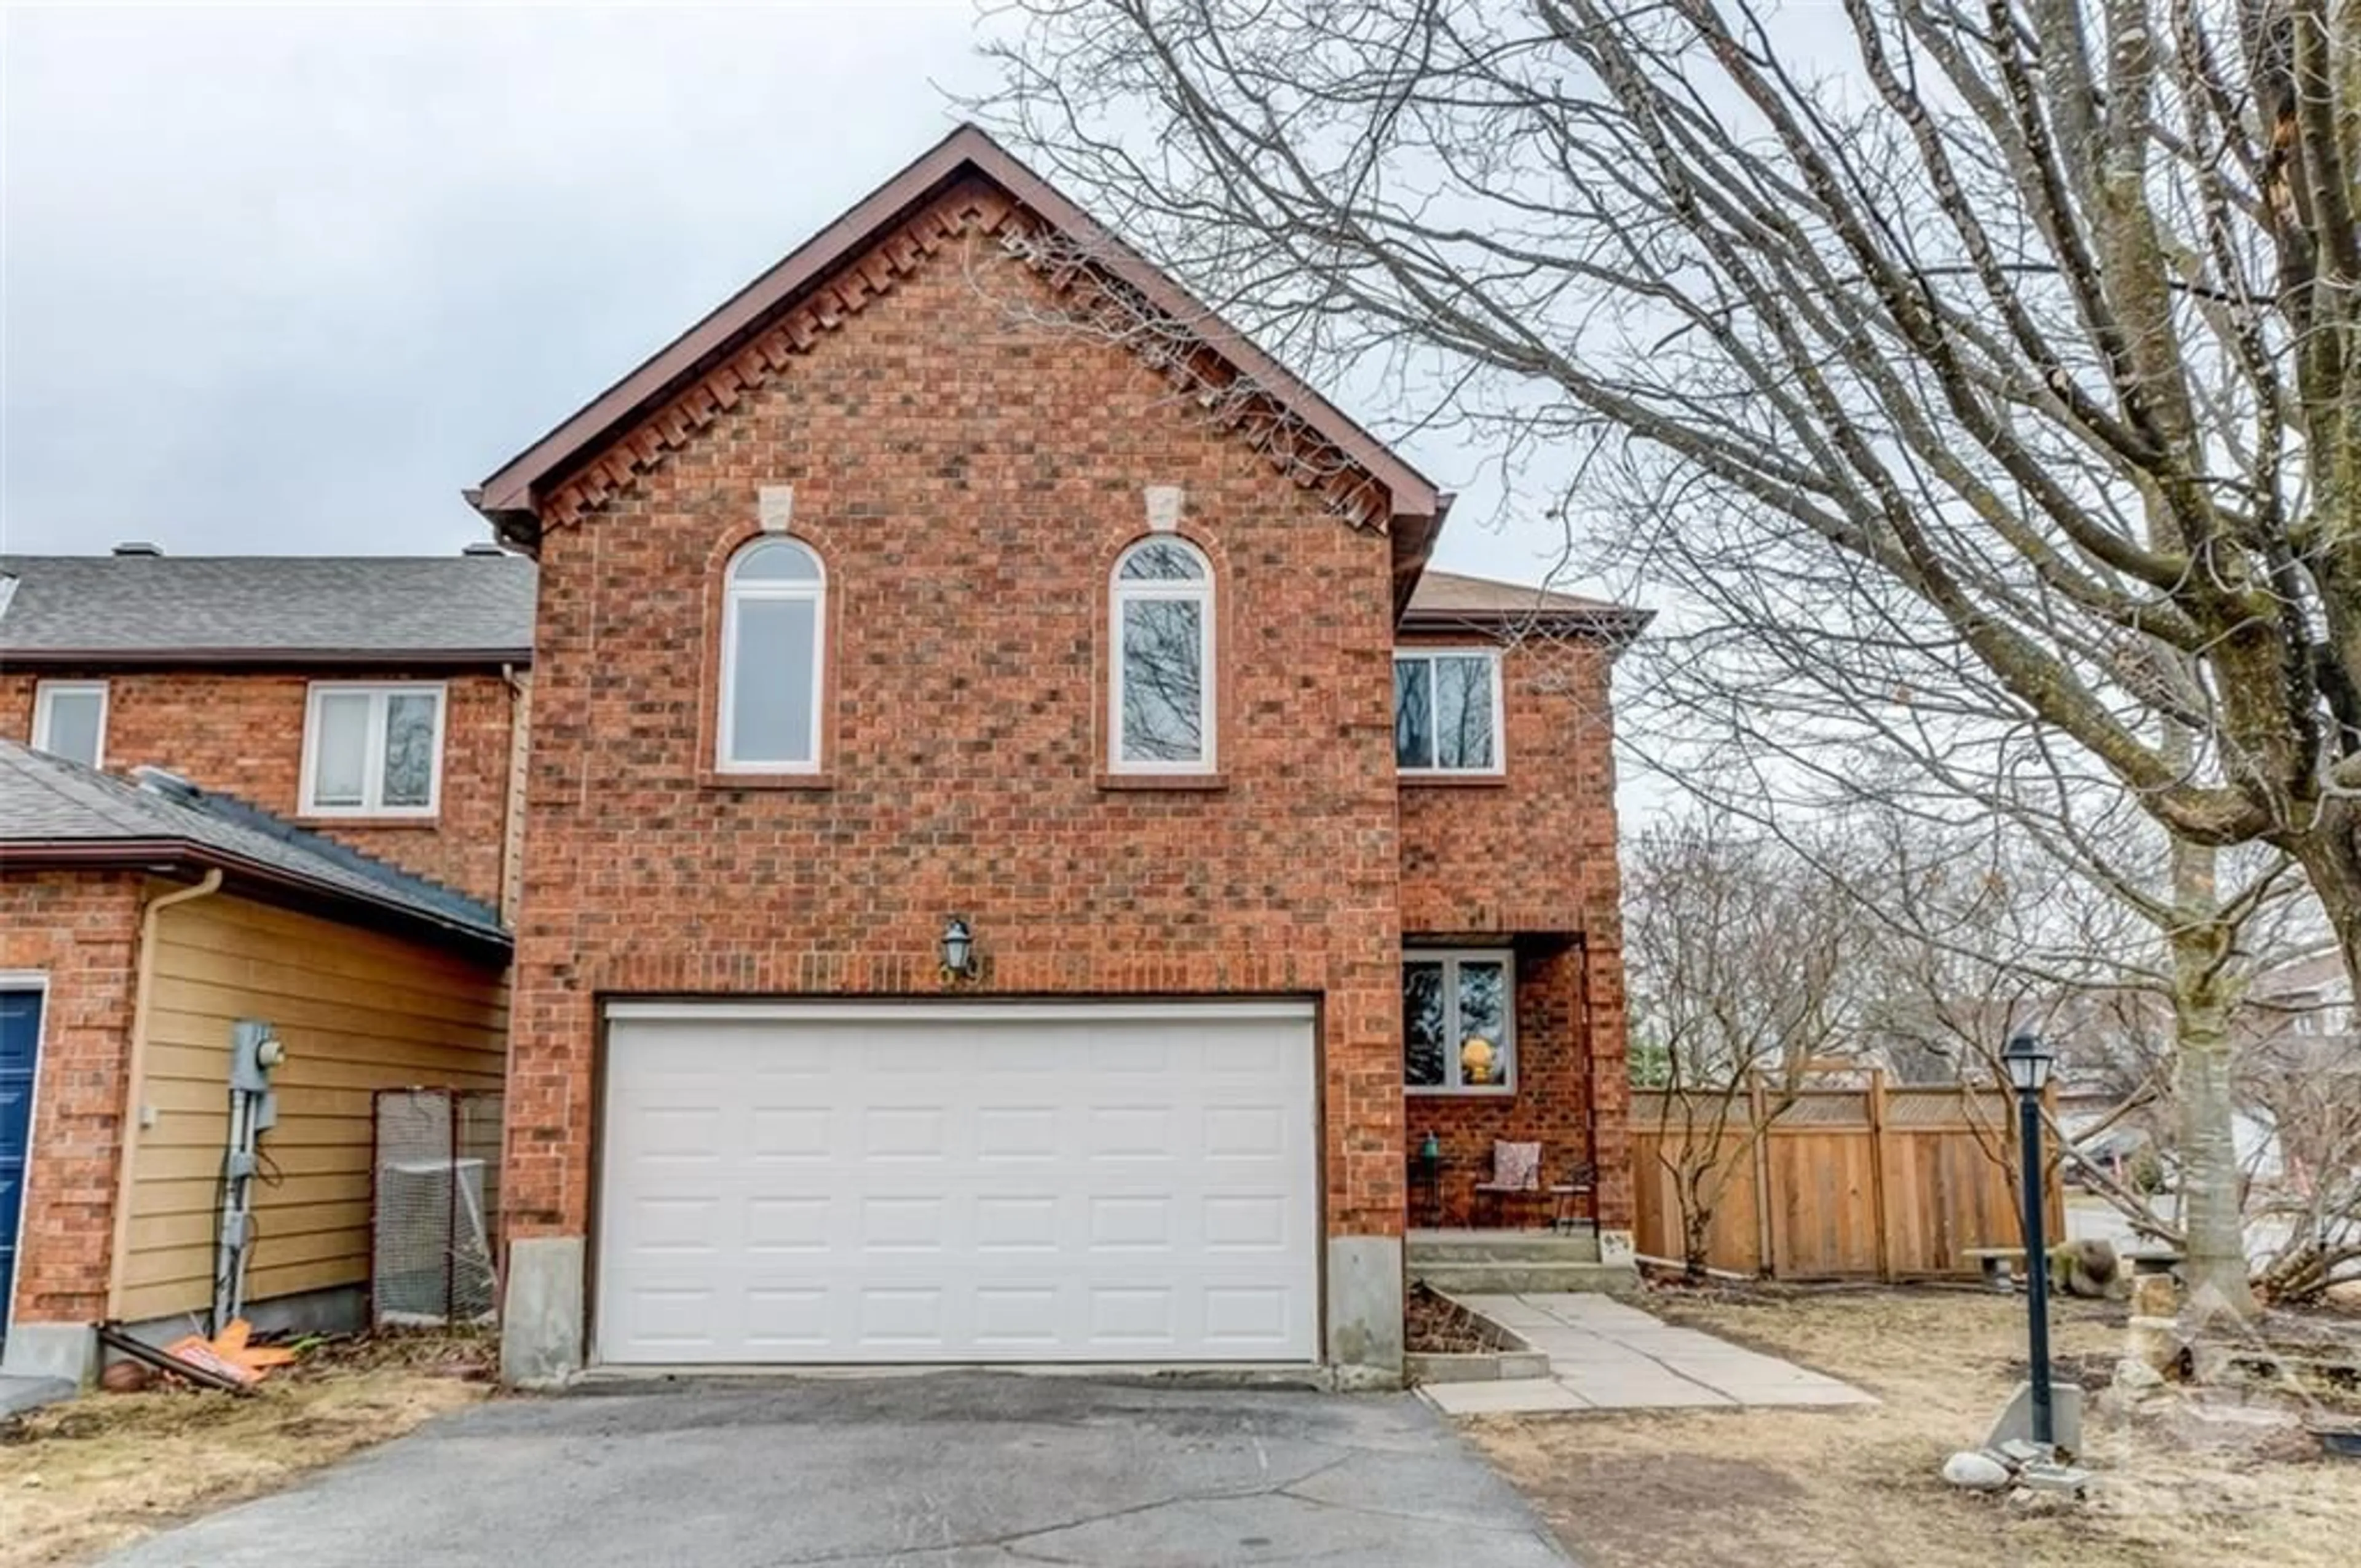 Home with brick exterior material for 39 INWOOD Dr, Ottawa Ontario K2M 1Z3